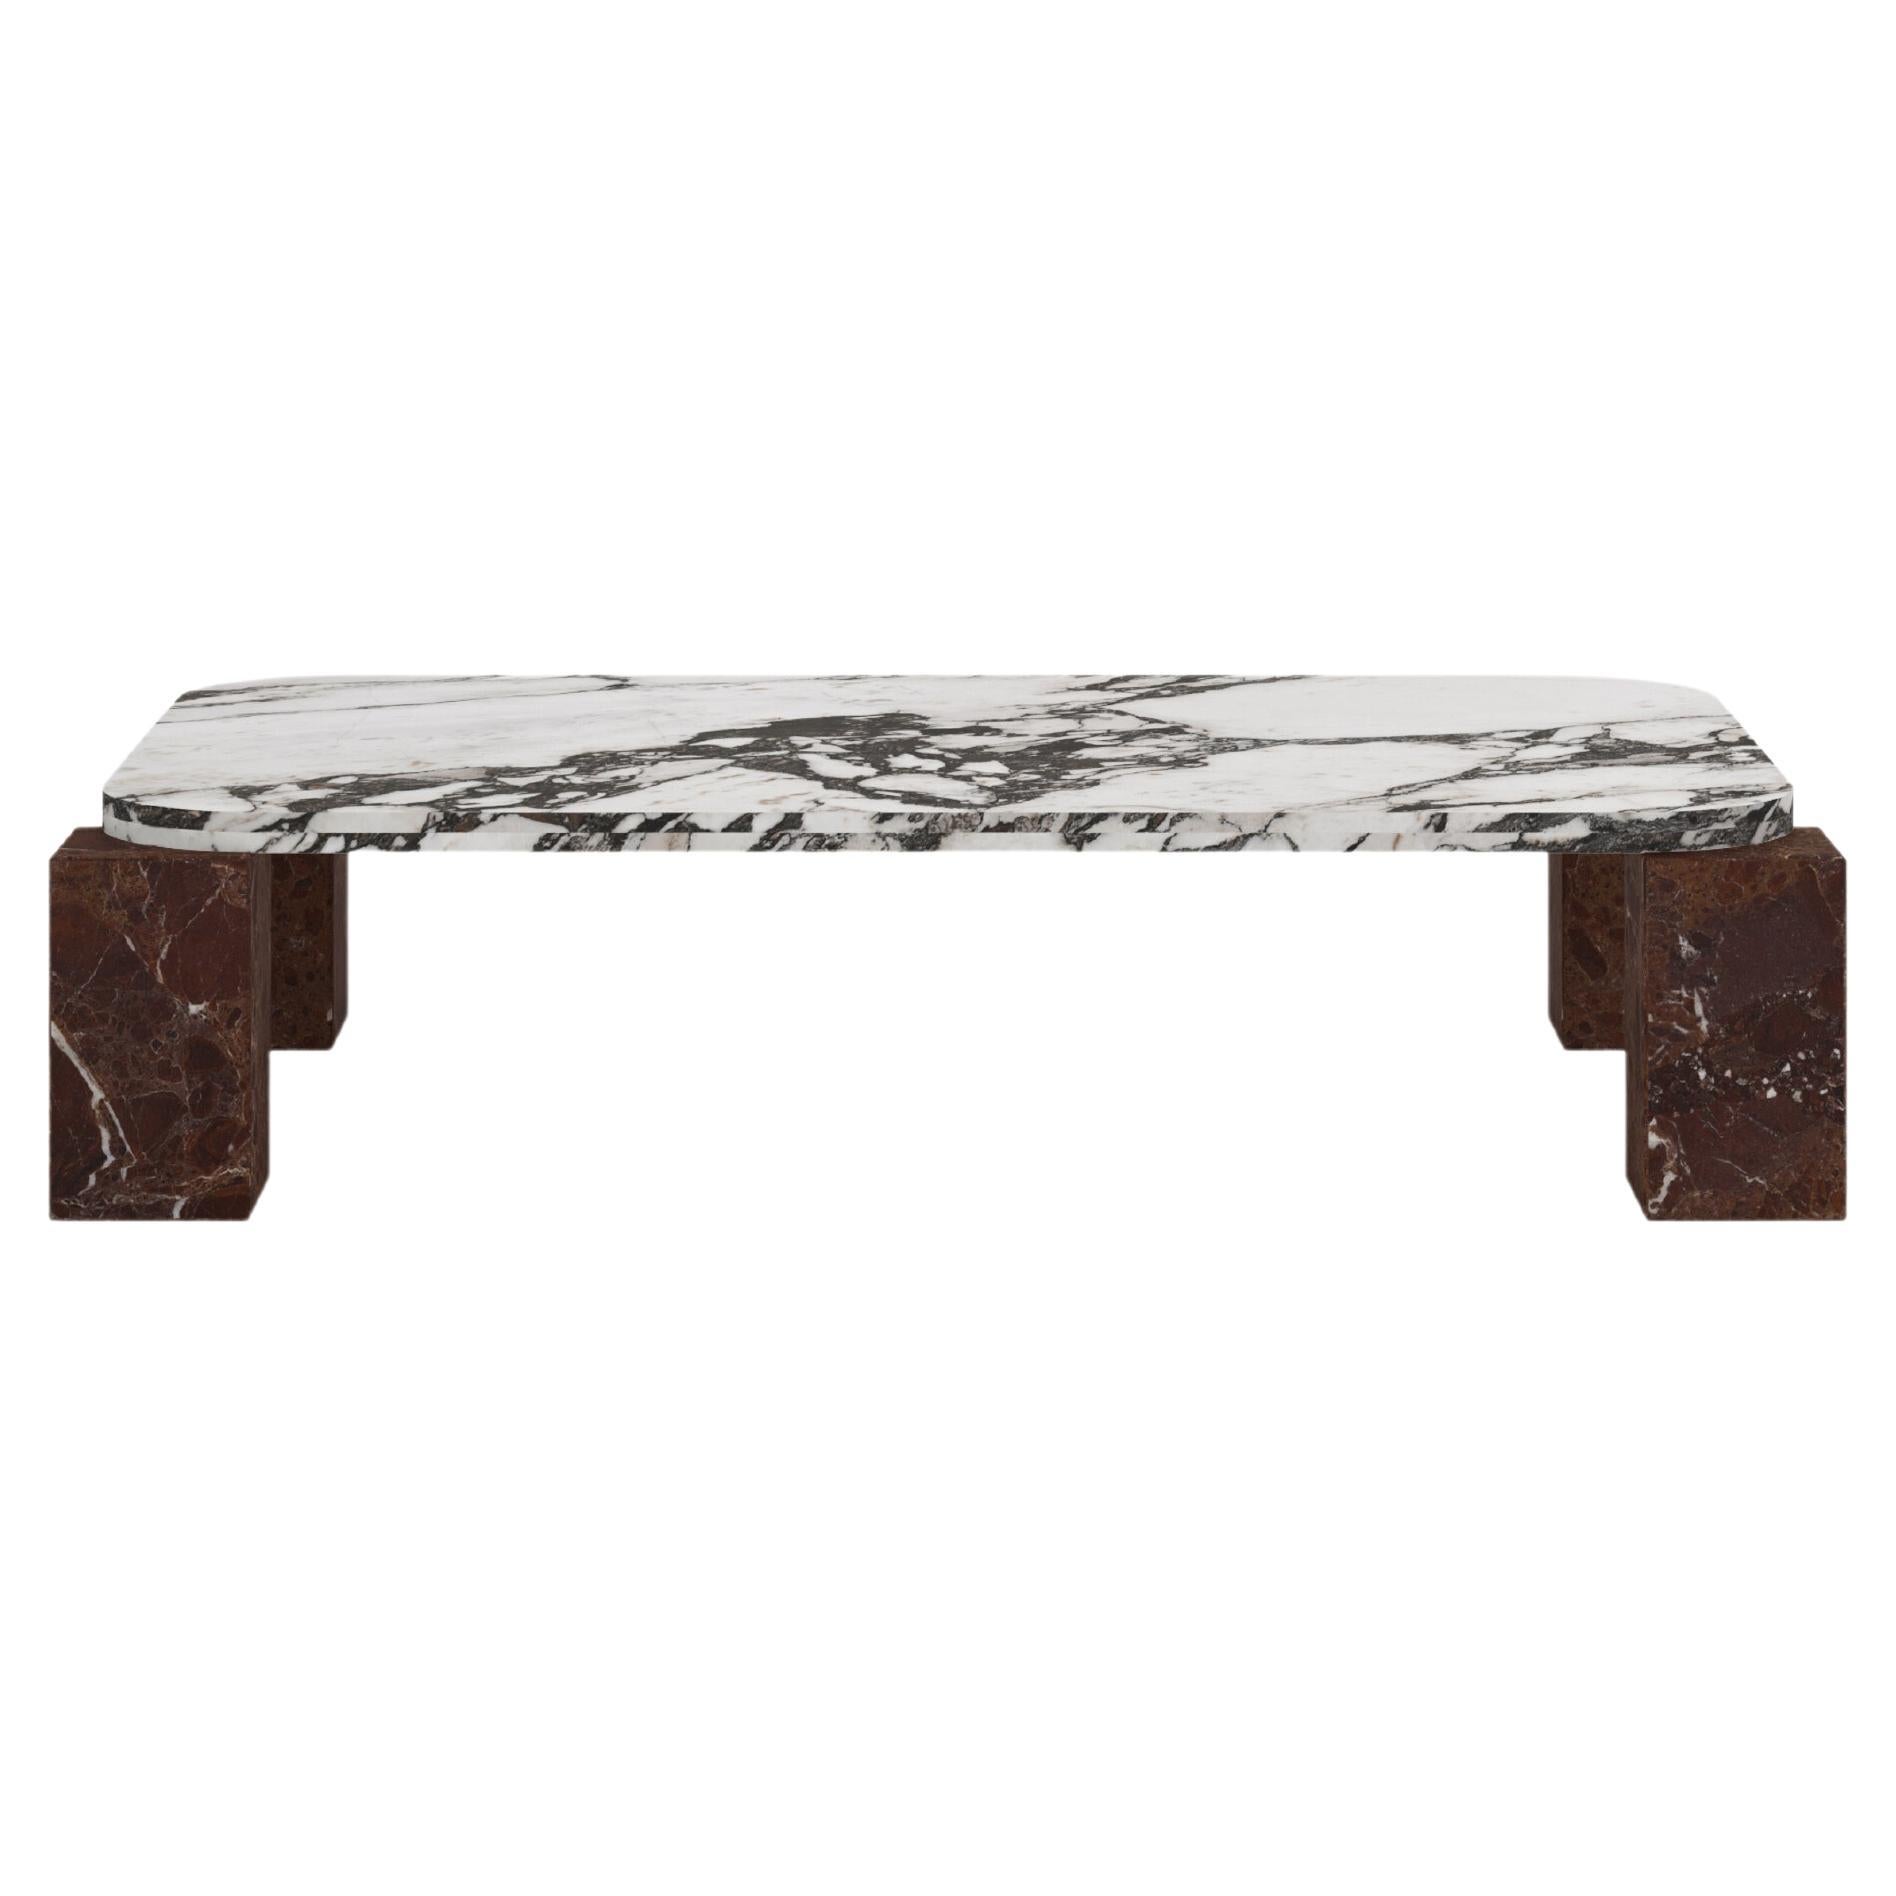 FORM(LA) Cubo Rectangle Coffee Table 62”L x 38”W x 14”H Viola & Rosso Marble For Sale